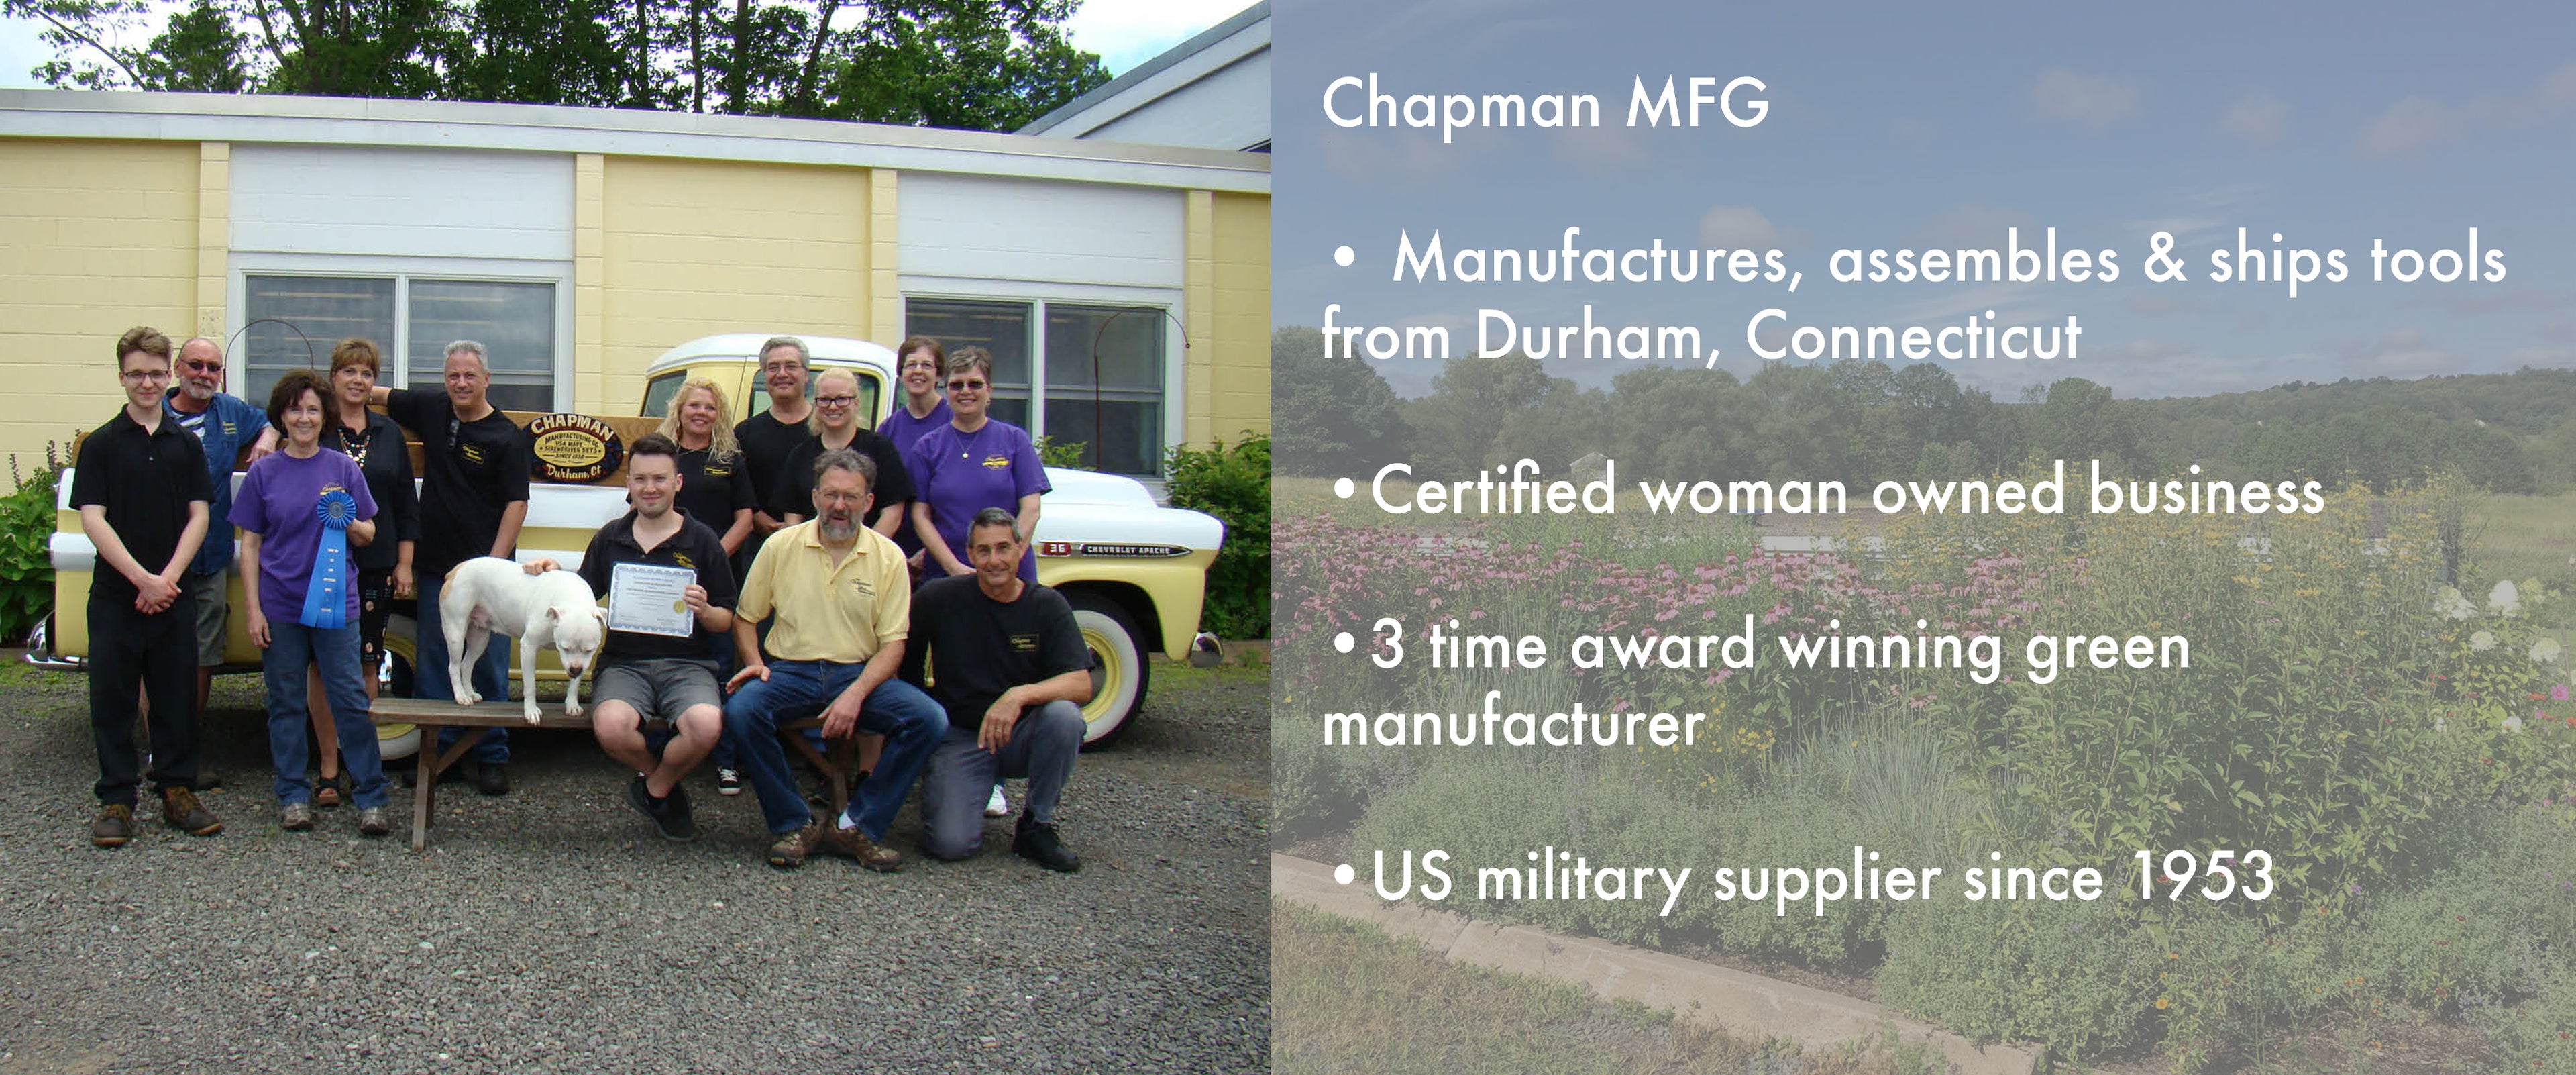 Shown is the Staff of Chapman Manufacturing, a certified woman owned business, at it's Durham, Connecticut production facility where it manufactures, assembles and ships tools. Chapman Manfacturing is a 3 time award winning green manufacturer and US milit